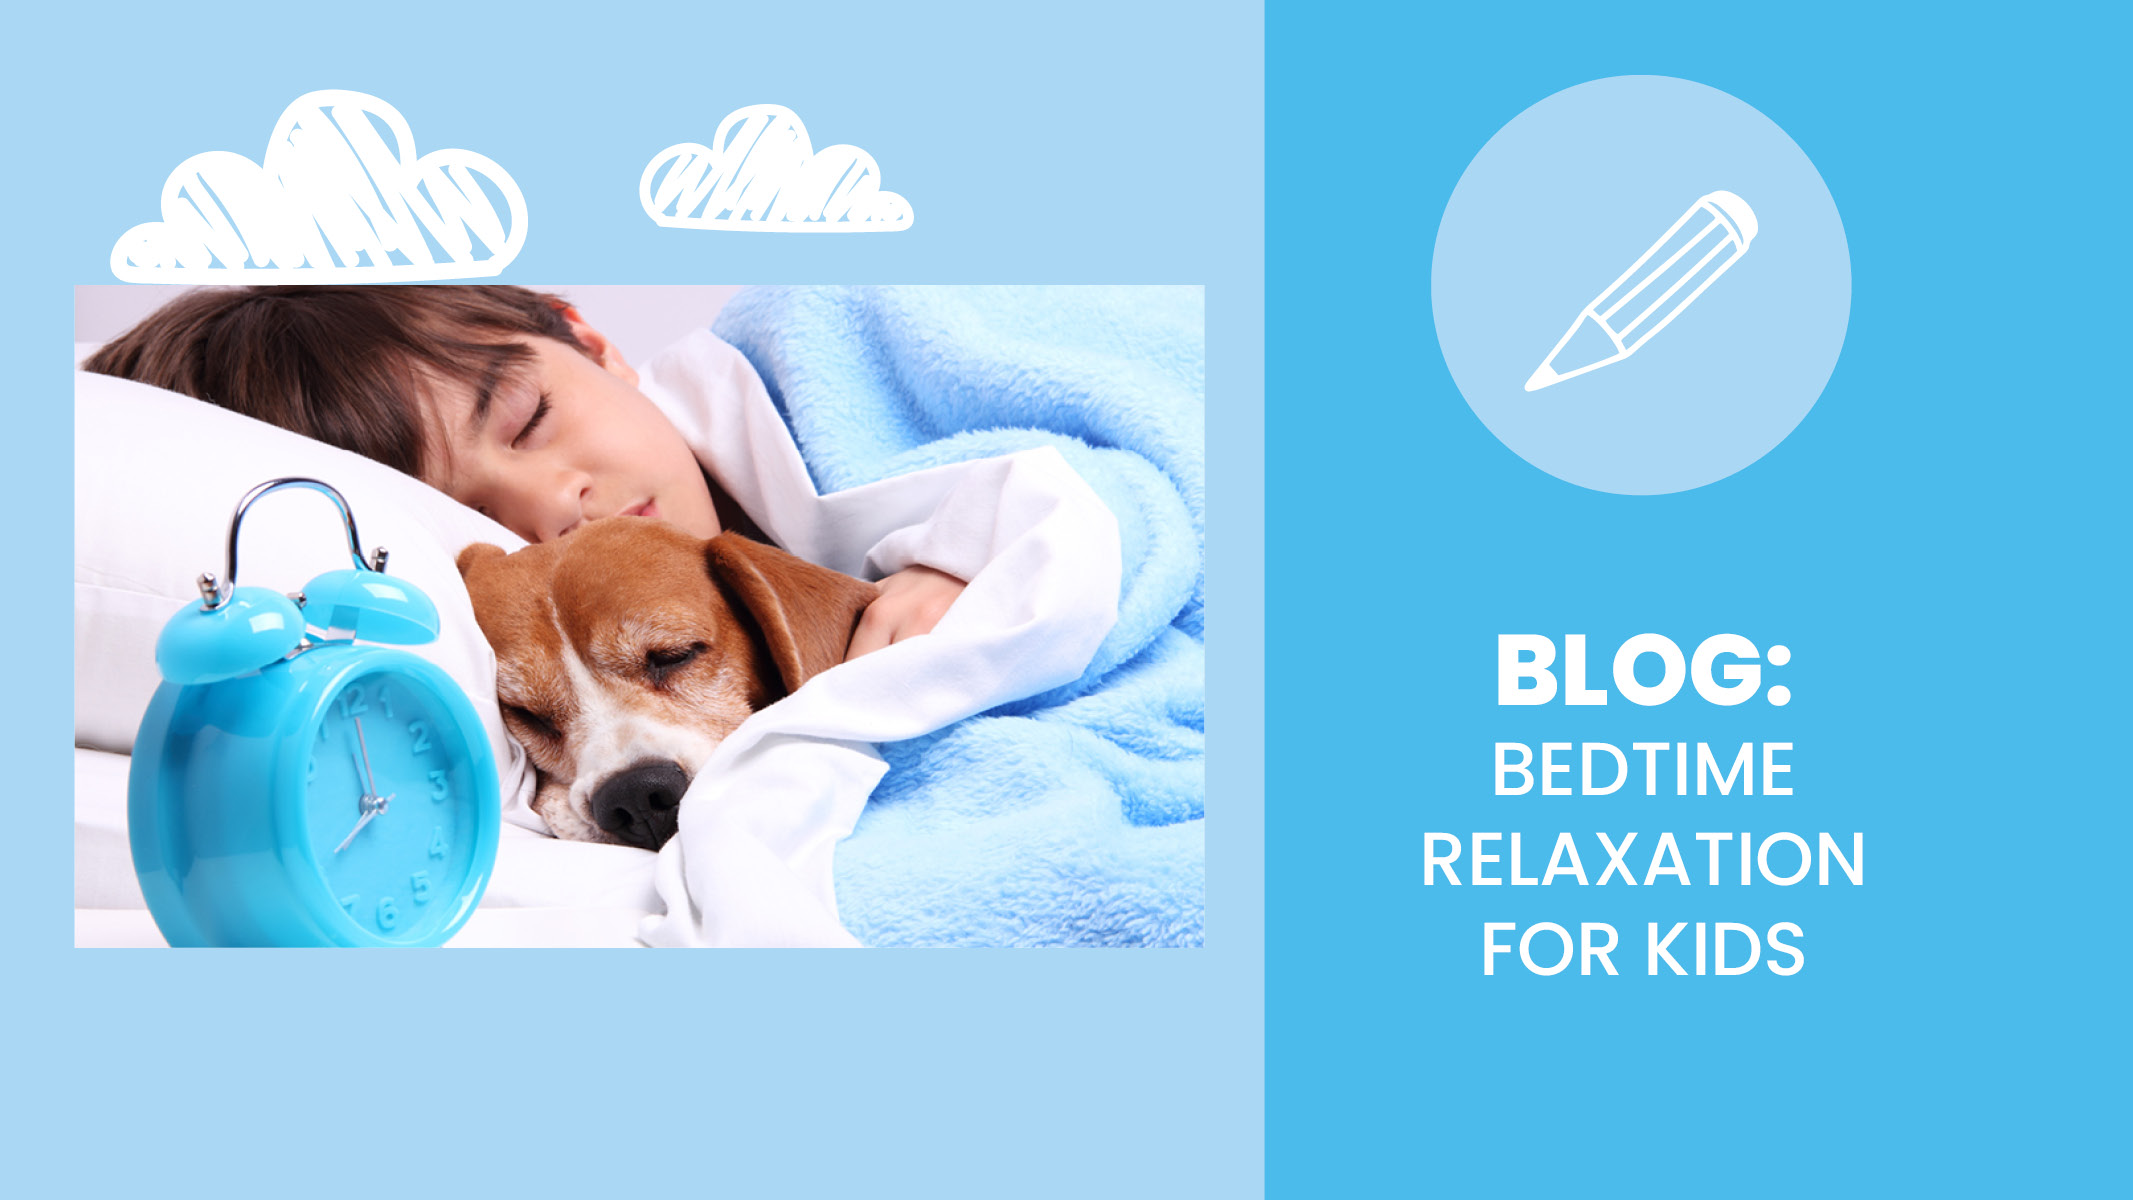 Young child, boy, lays in bed with dog to relax at bedtime